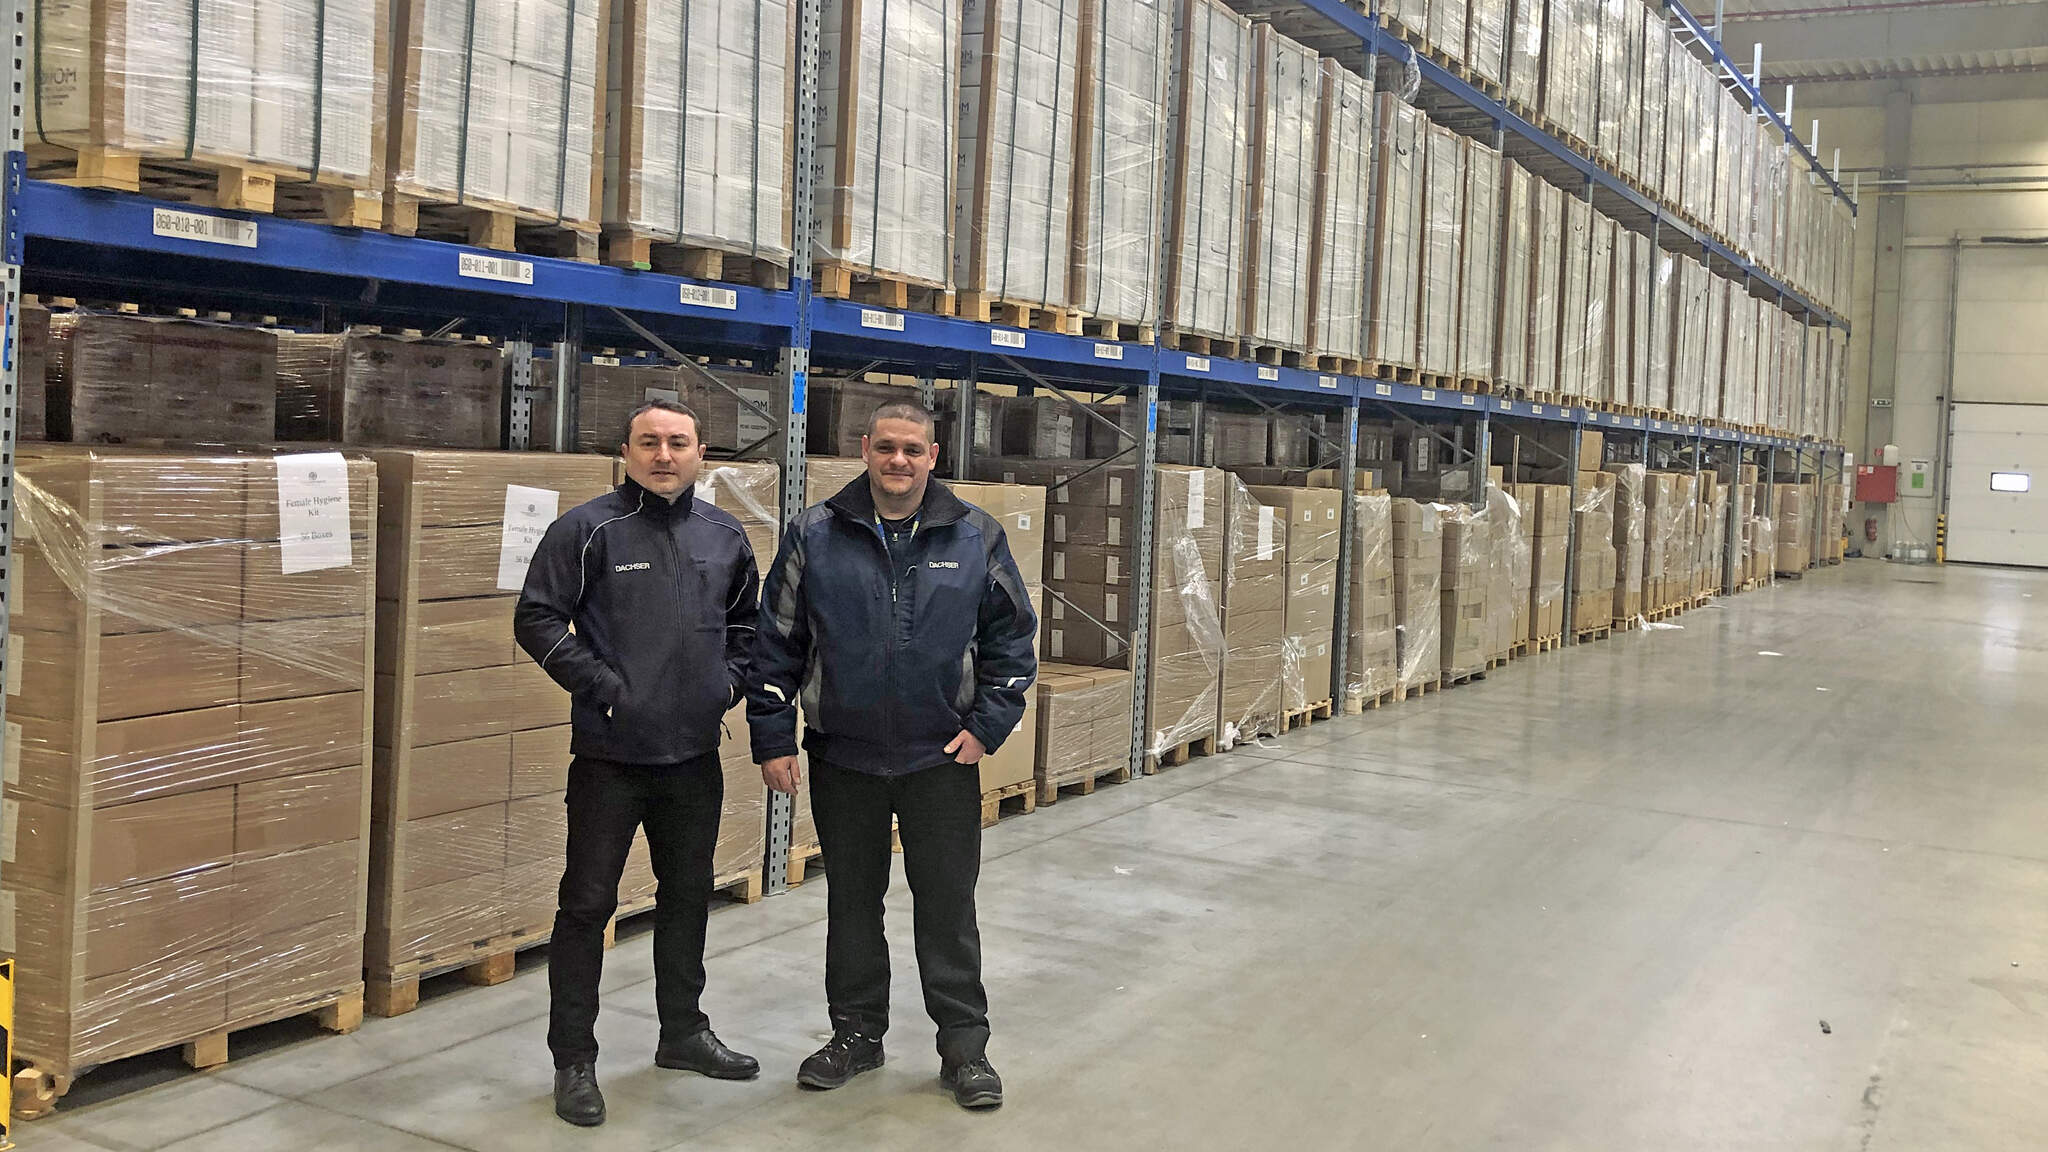 From right: V. Margecansky (IOM) and S. Balog (DACHSER) at the DACHSER logistics center in Košice